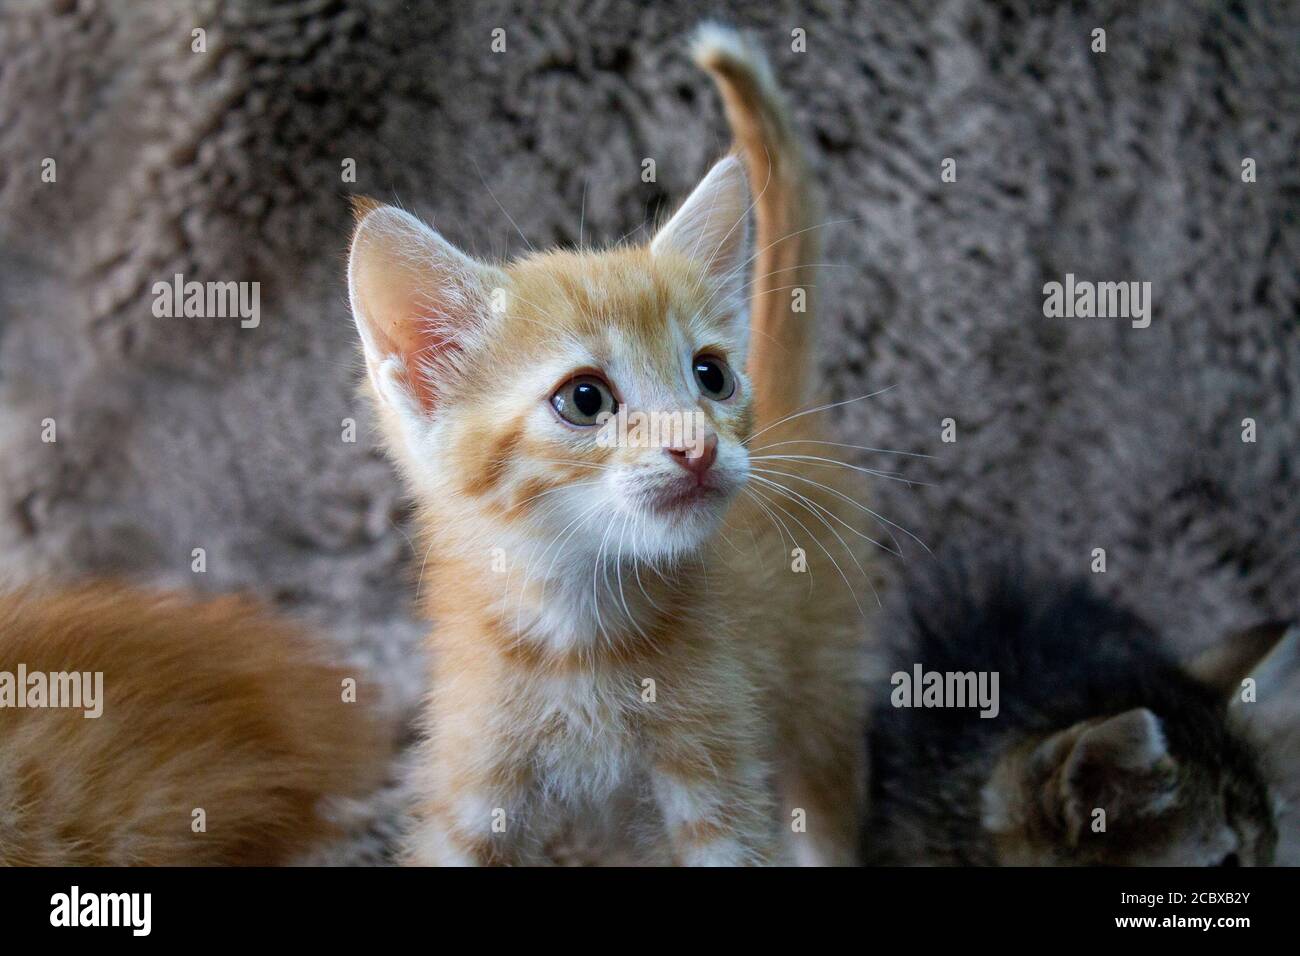 4 kittens waiting for their owners Stock Photo